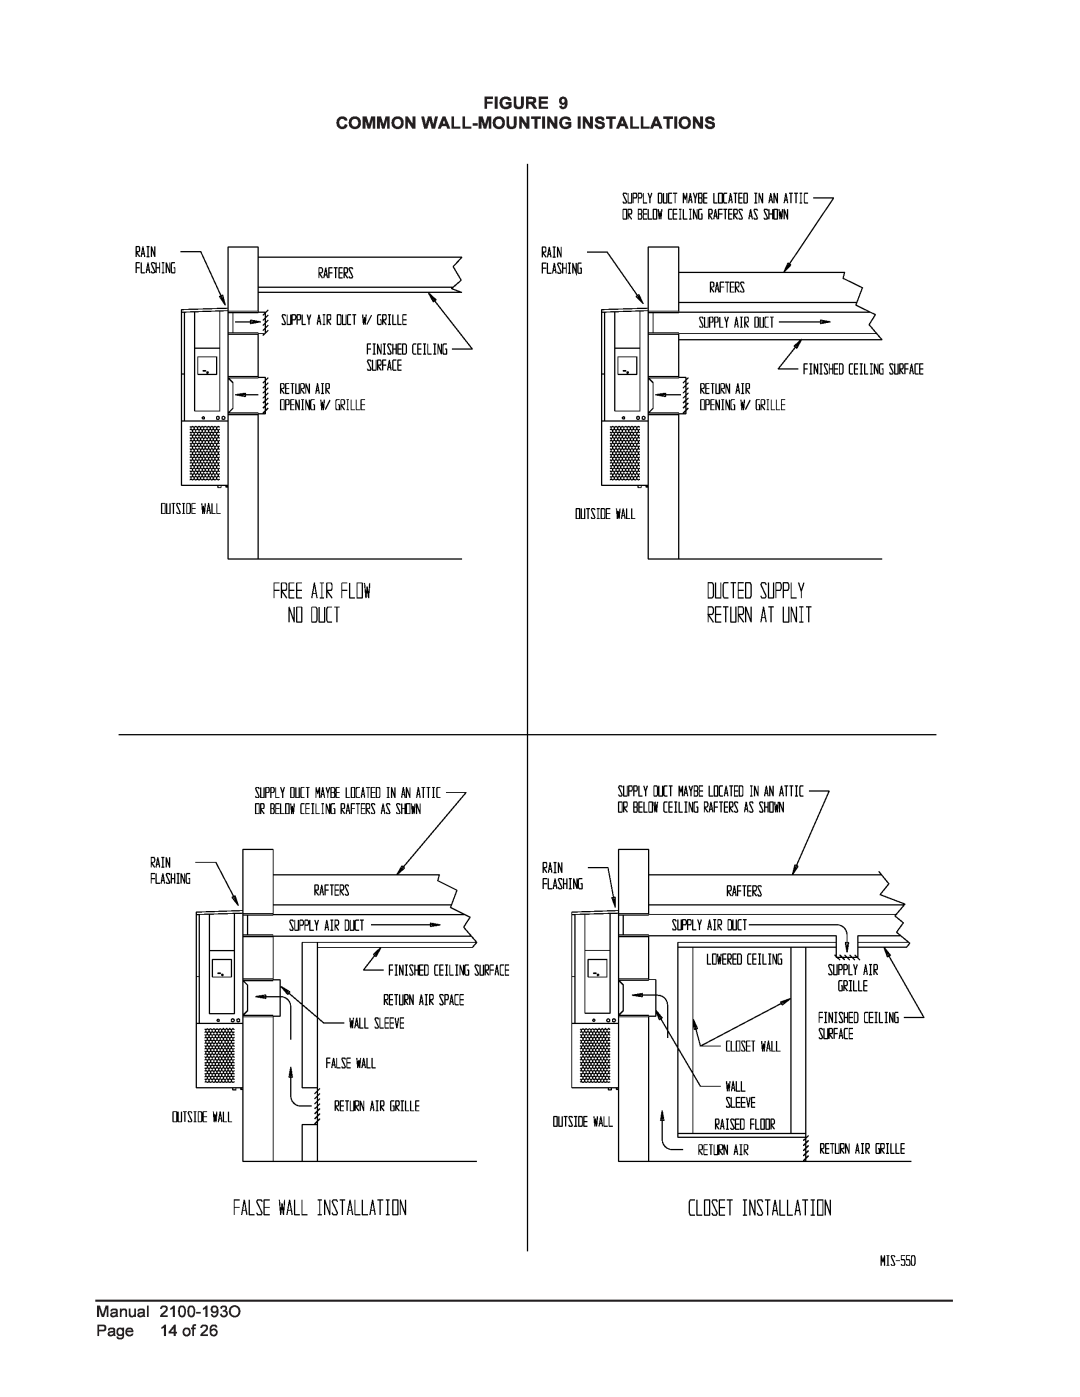 Bard WH-301, WH361 installation instructions Figure Common Wall-Mountinginstallations, Manual, Page, 14 of 